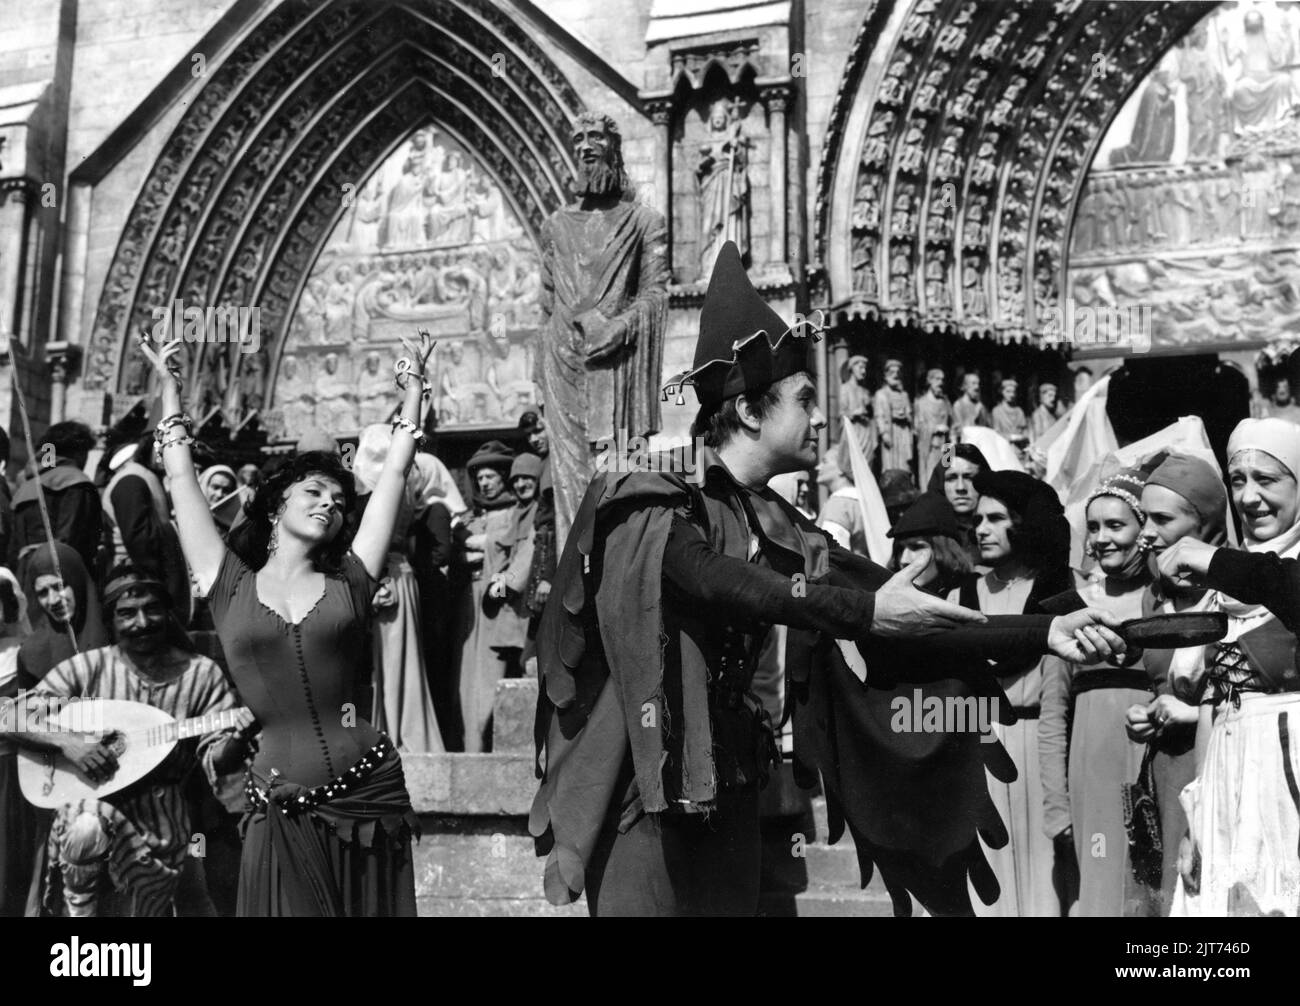 GINA LOLLOBRIGIDA as Esmeralda and ROBERT HIRSCH as Gringoire in THE HUNCHBACK OF NOTRE DAME / NOTRE DAME DE PARIS 1956 director JEAN DELANNOY novel Victor Hugo adaptation / dialogue Jean Aurenche and Jacques Prevert music Georges Auric costume design Georges Benda production design Rene Renoux choreographer Leonid Massine producers Raymond and Robert Hakim France - Italy co-production Paris Film Productions / Panitalia Stock Photo